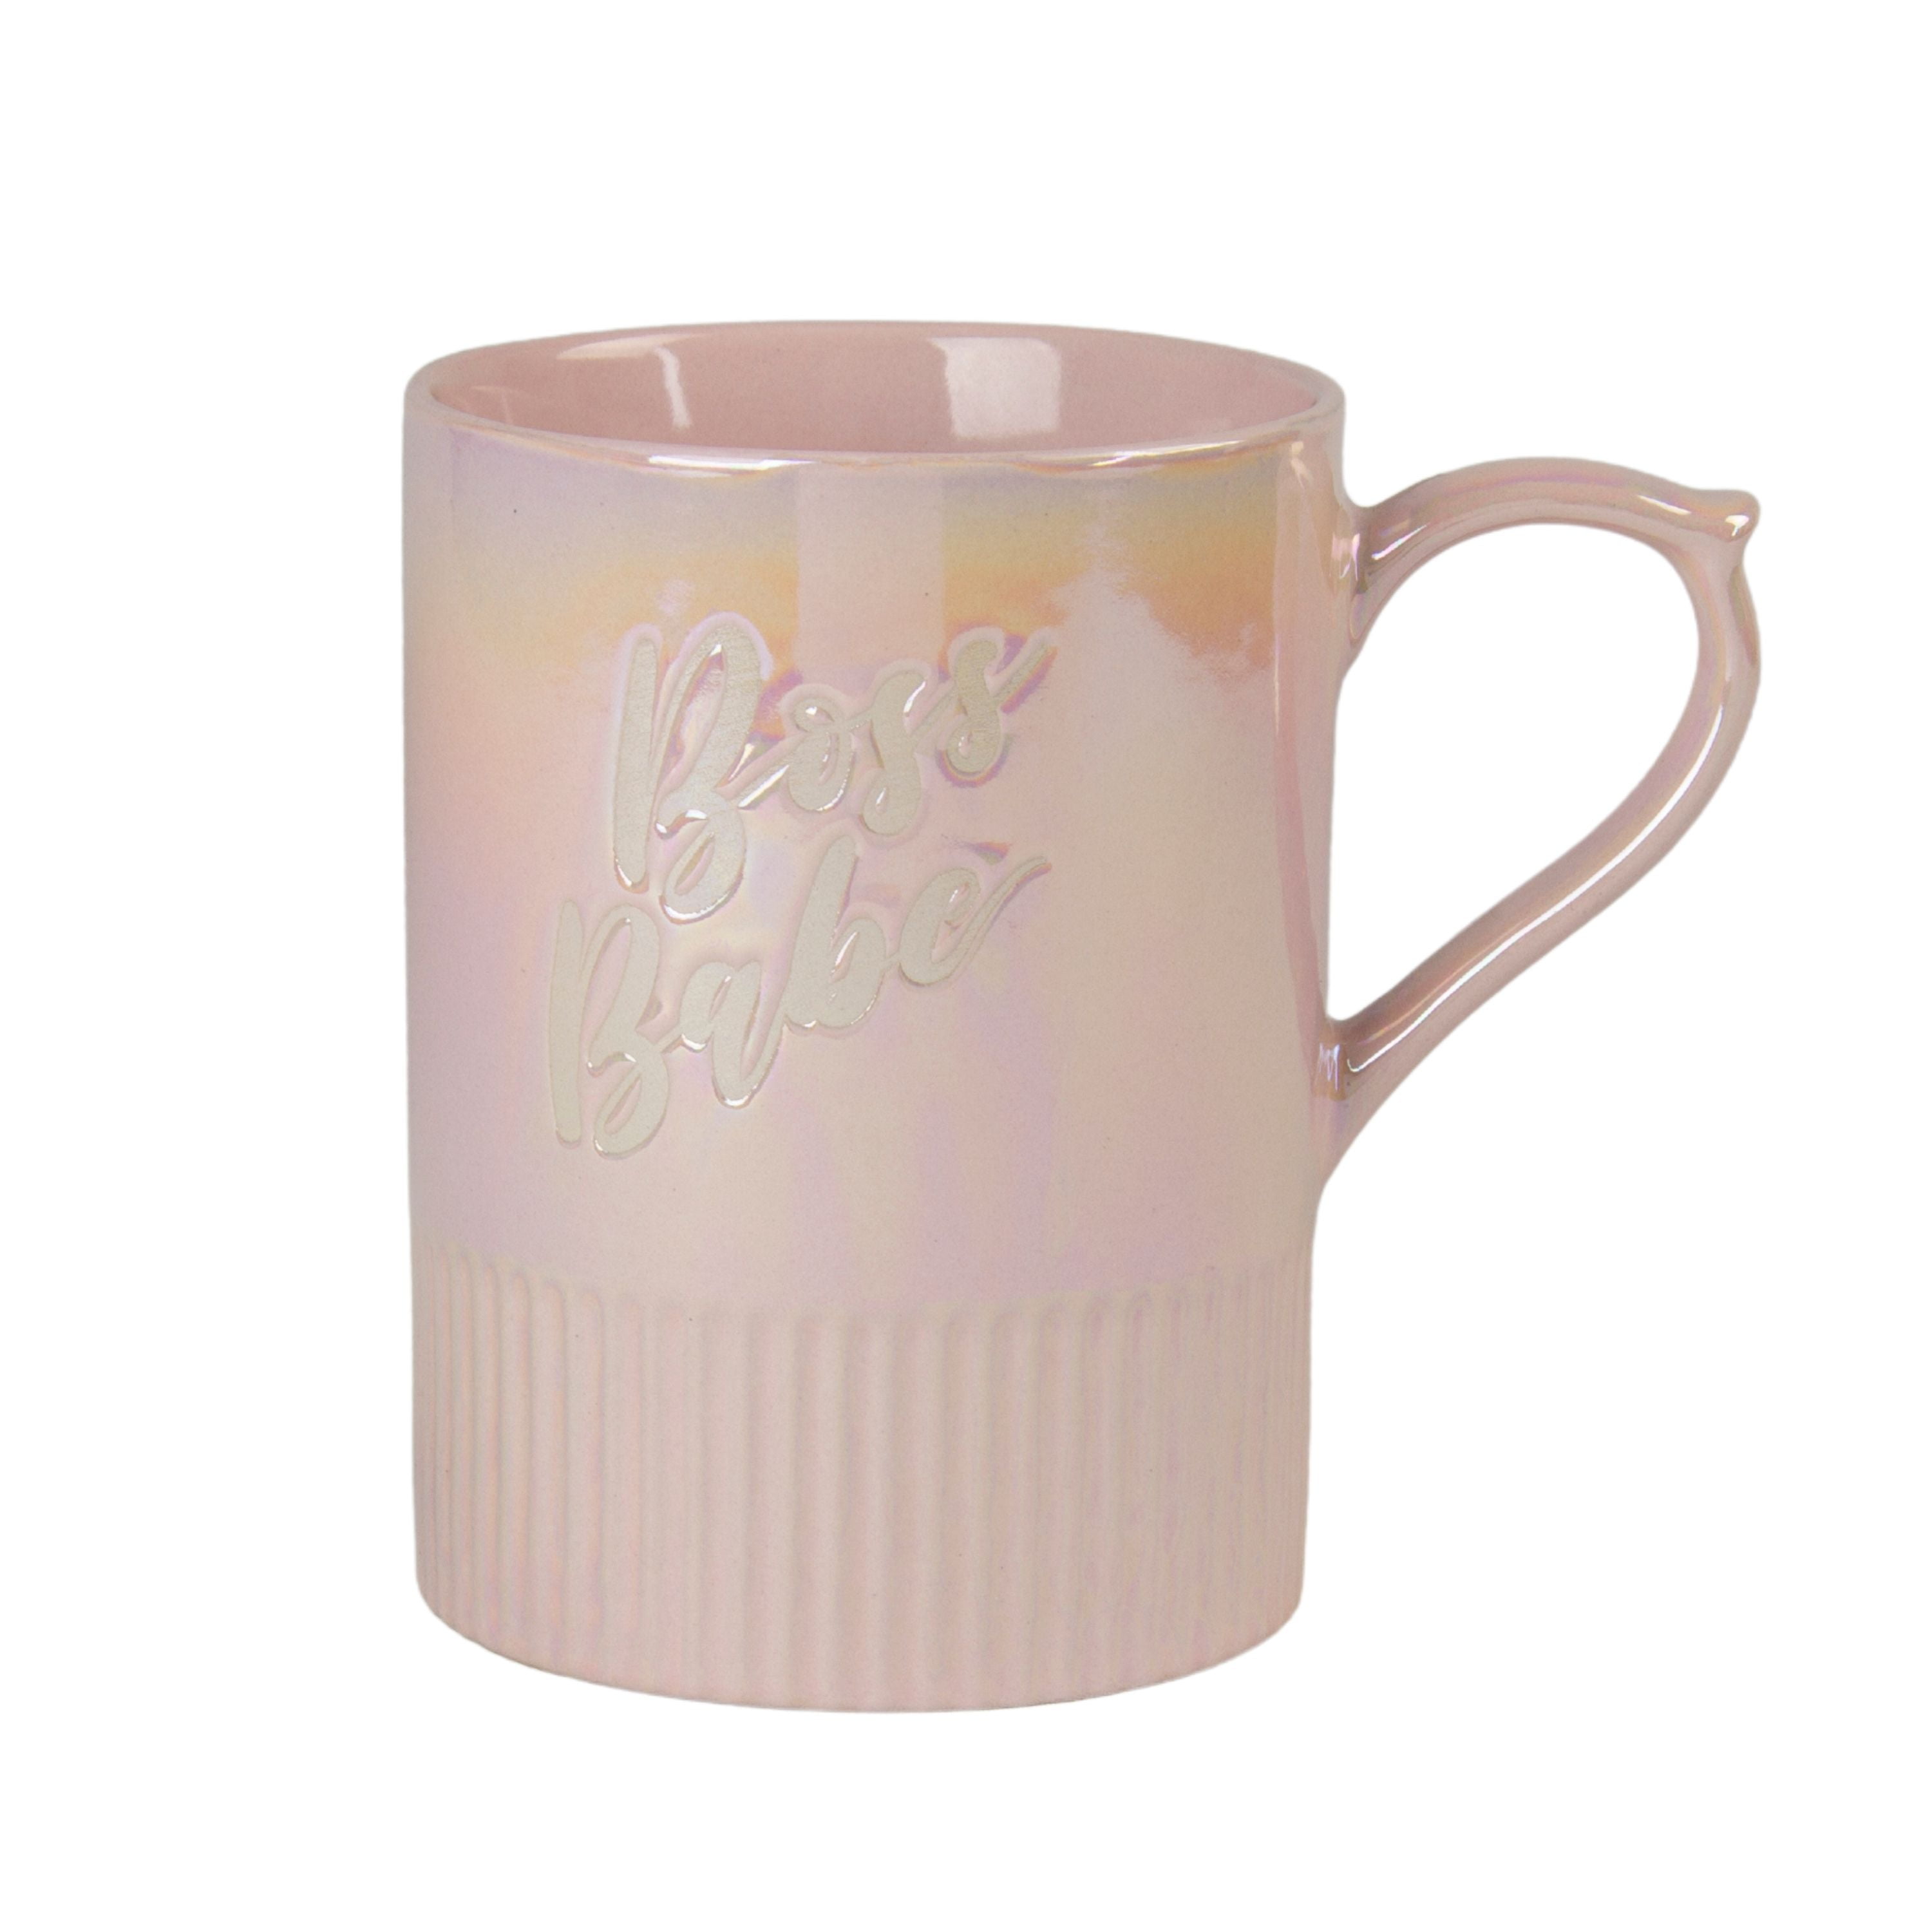 Mugsby Babes support babes travel cup  Trendy Tumblers, Cups & Mugs - Lush  Fashion Lounge